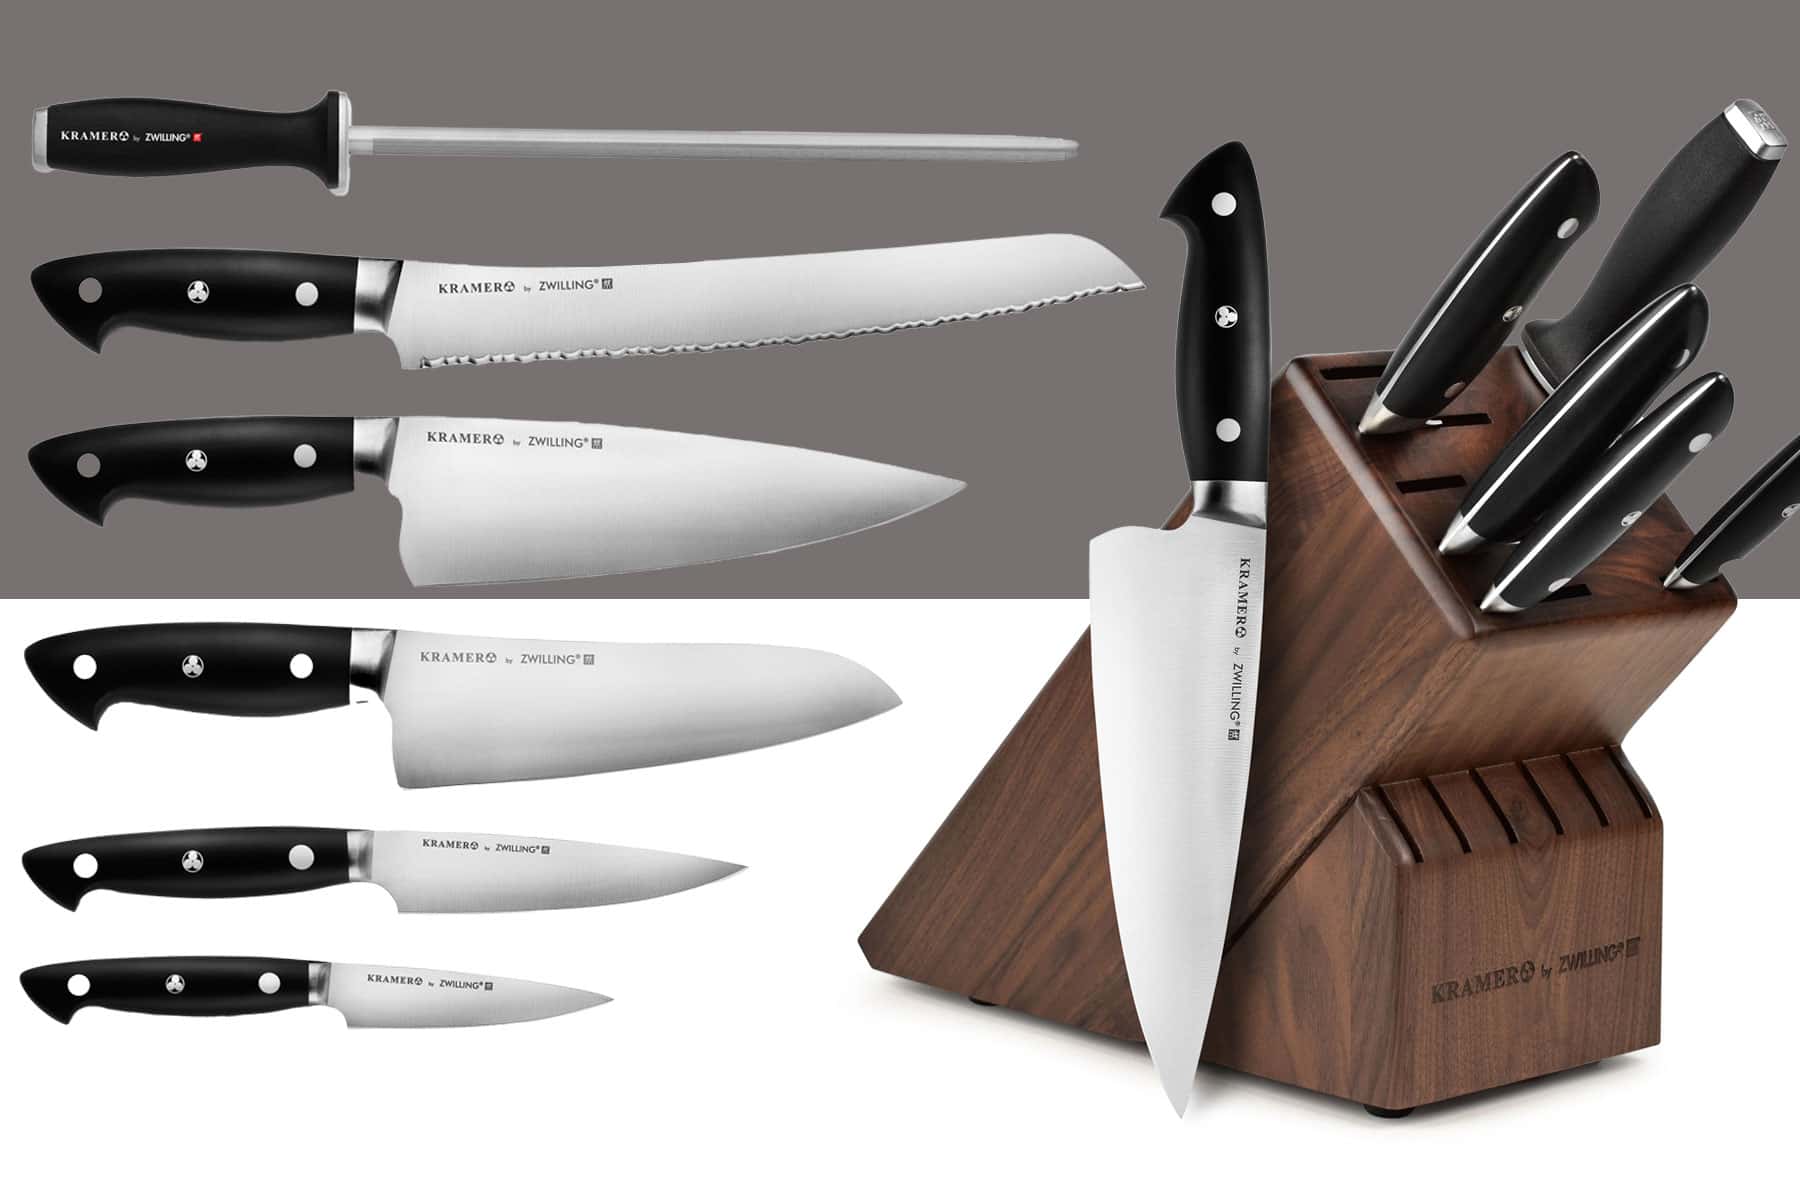 The Zwilling by Kramer Euroline Essential knife set shown with the wood storage block on a white and gray background.